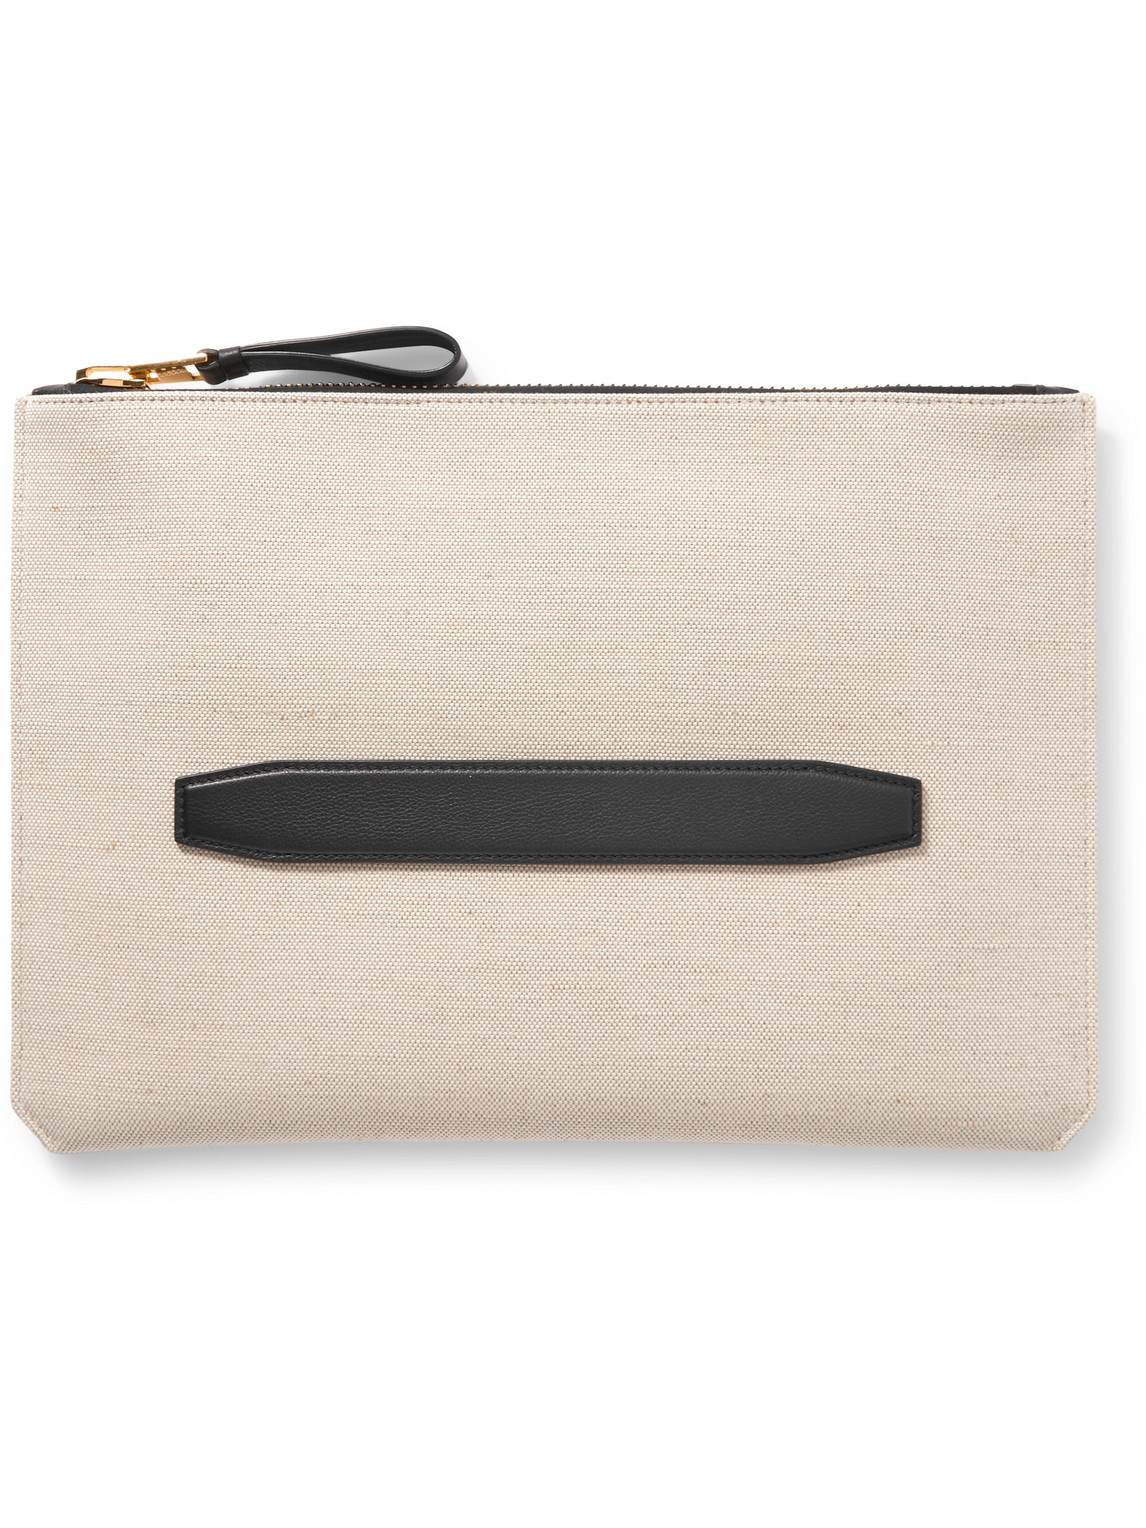 Buckley Leather-Trimmed Canvas Document Holder